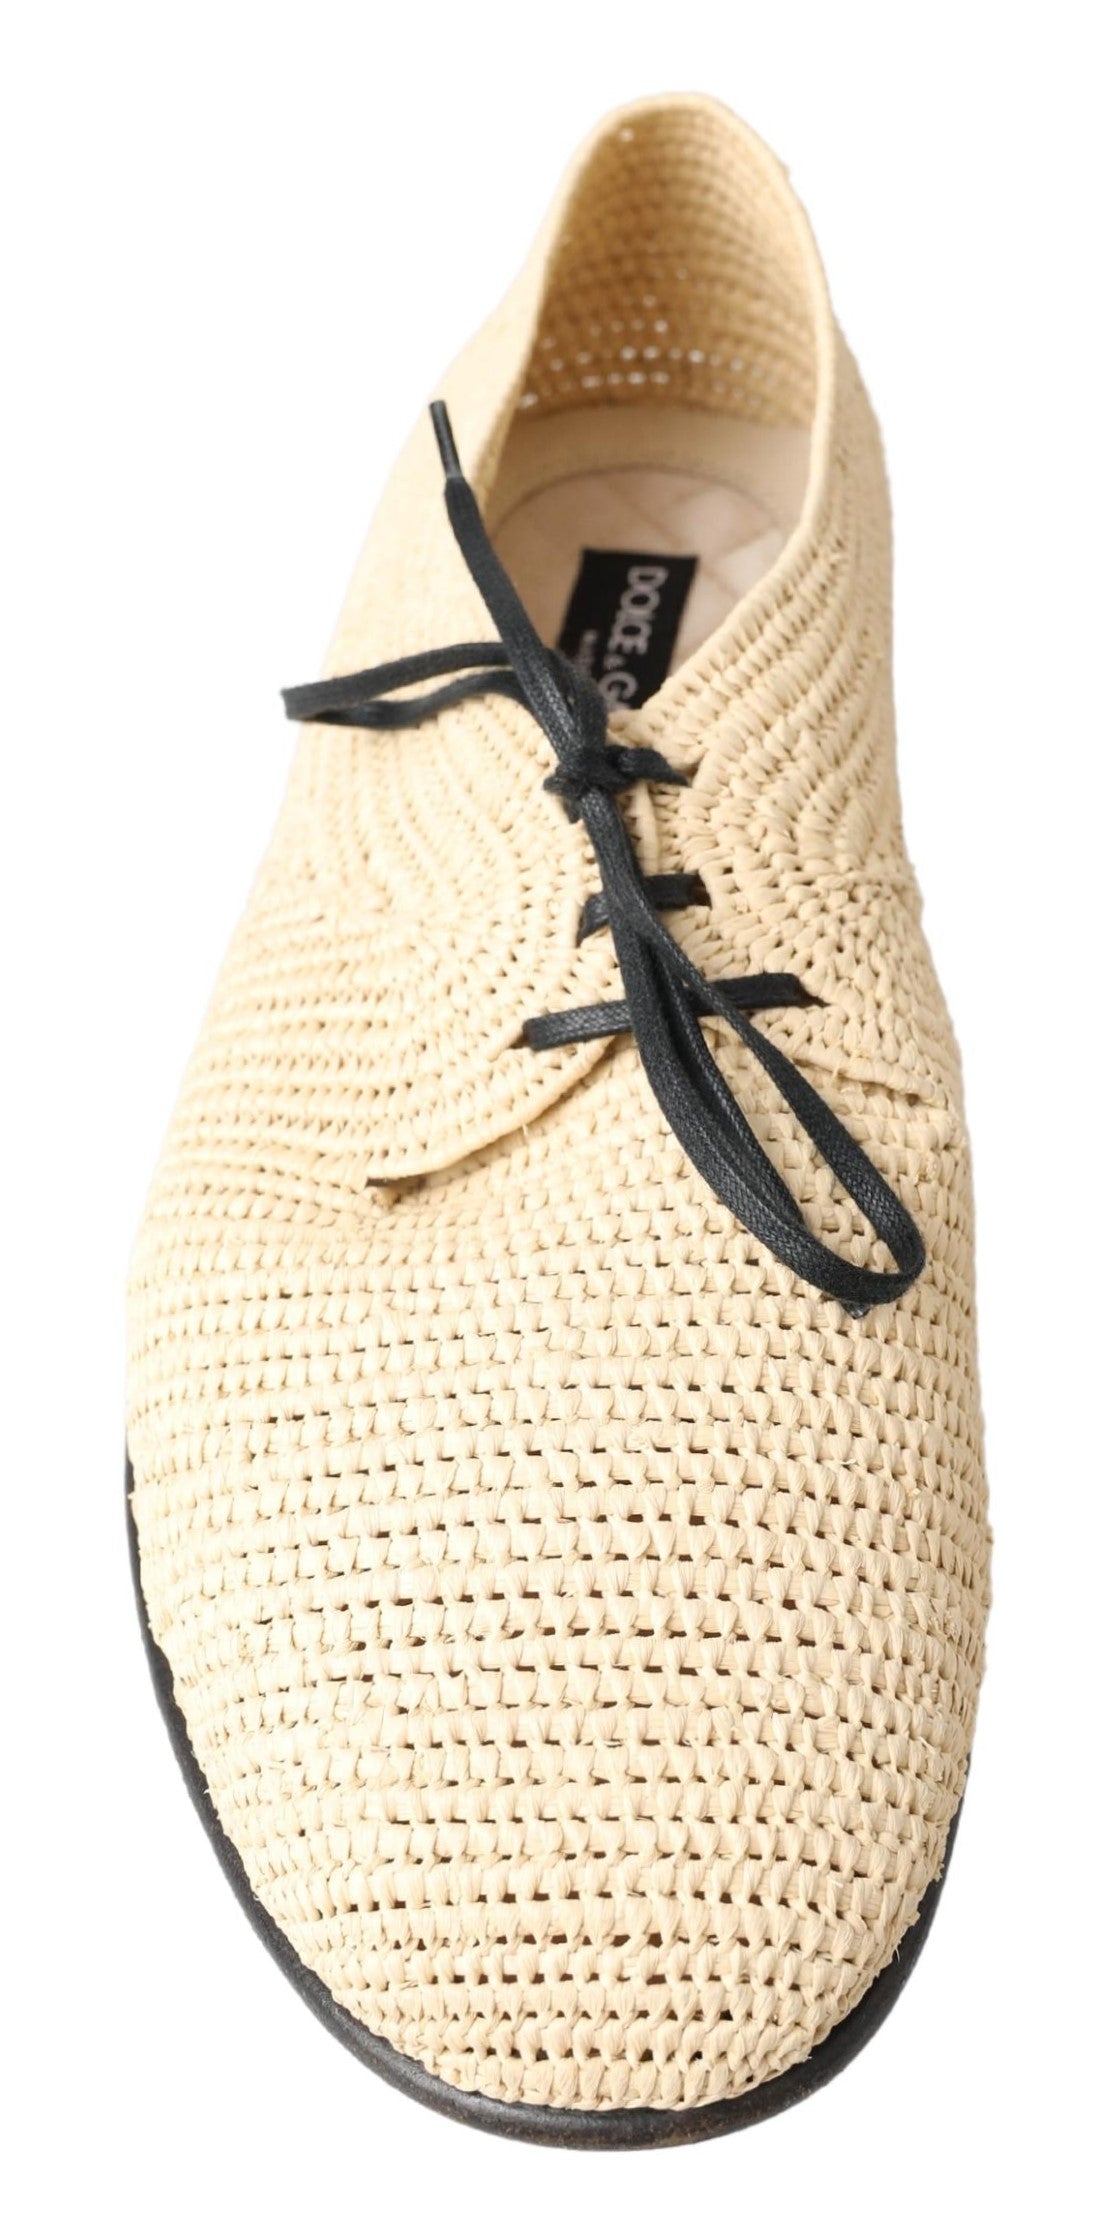 Dolce & gabbana Beige Woven Lace Up Casual Derby Shoes